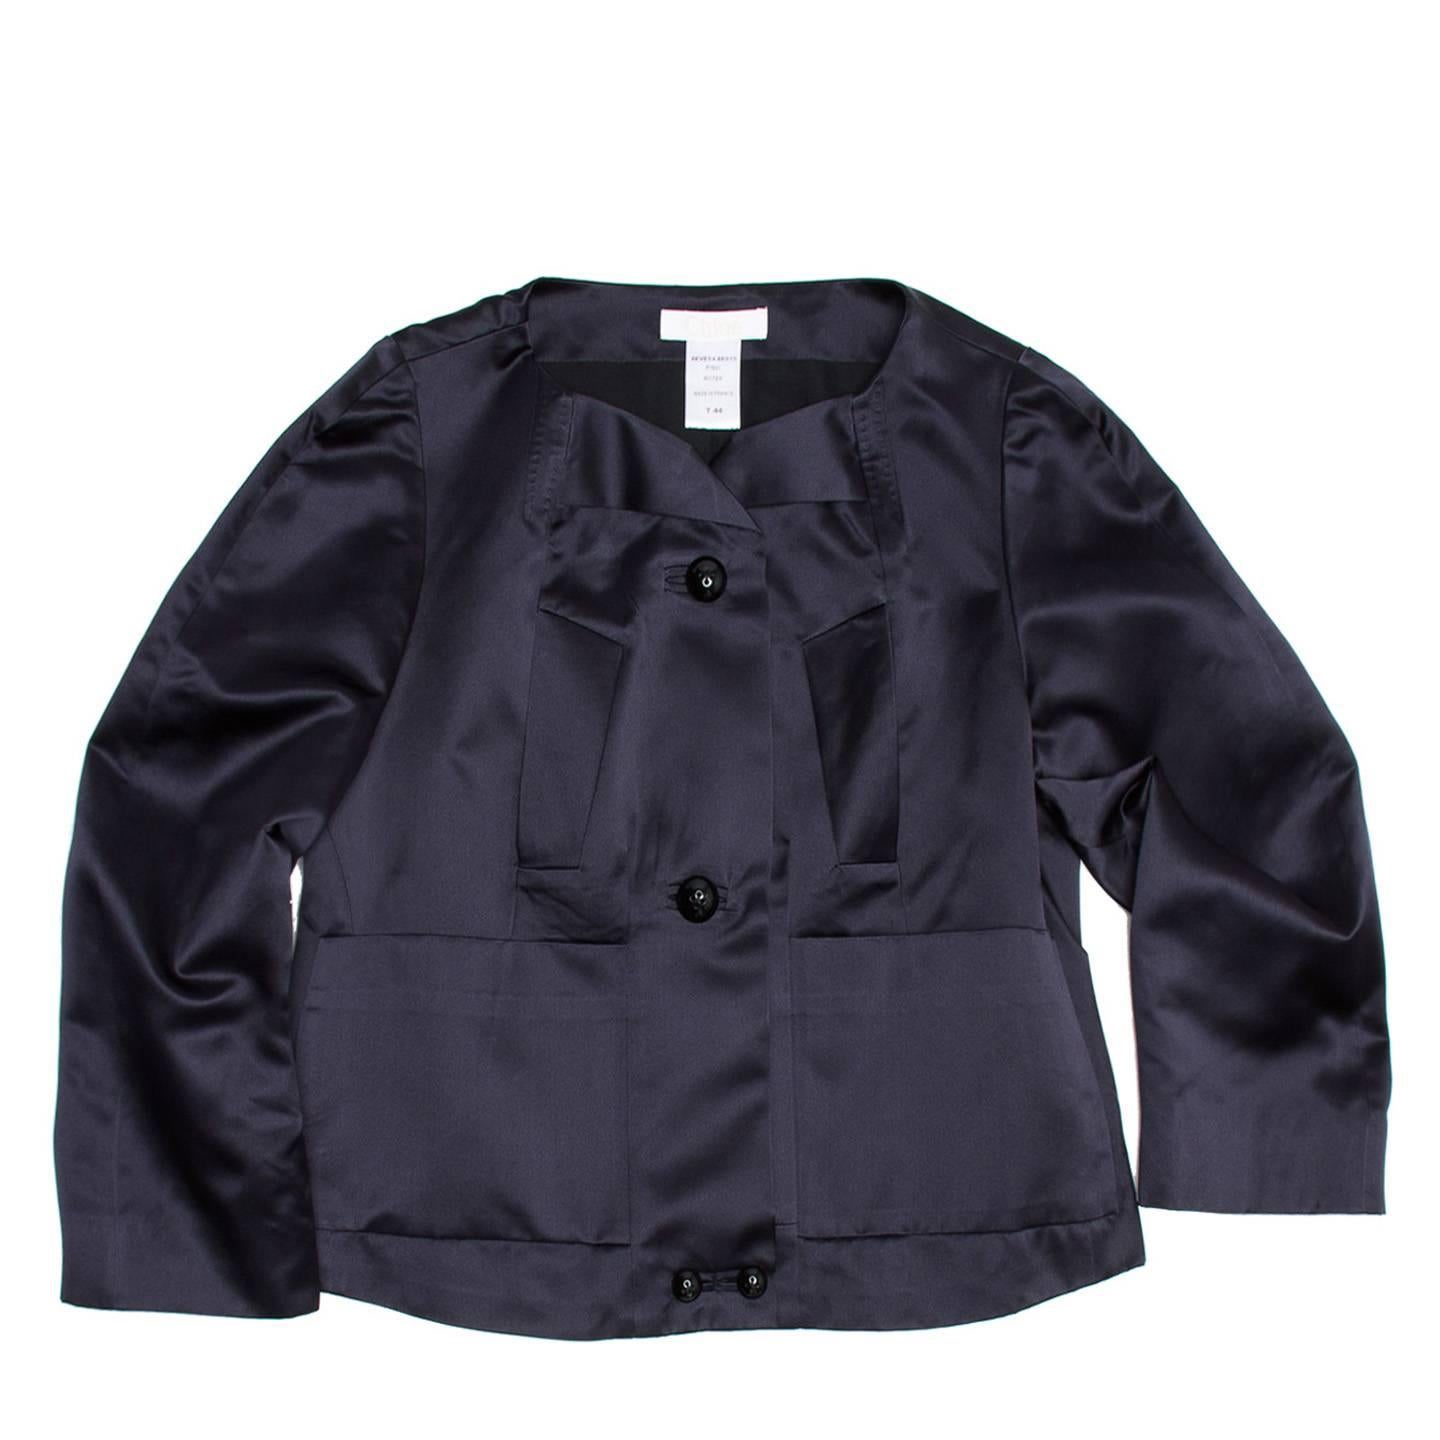 Ink silk satin collarless cropped jacket with straight fit. The front collar recalls origami folds and is enriched on the sides by tone-on-tone hand top stitches. Two slash pockets panels and two rectangular patch pockets contribute to the geometric